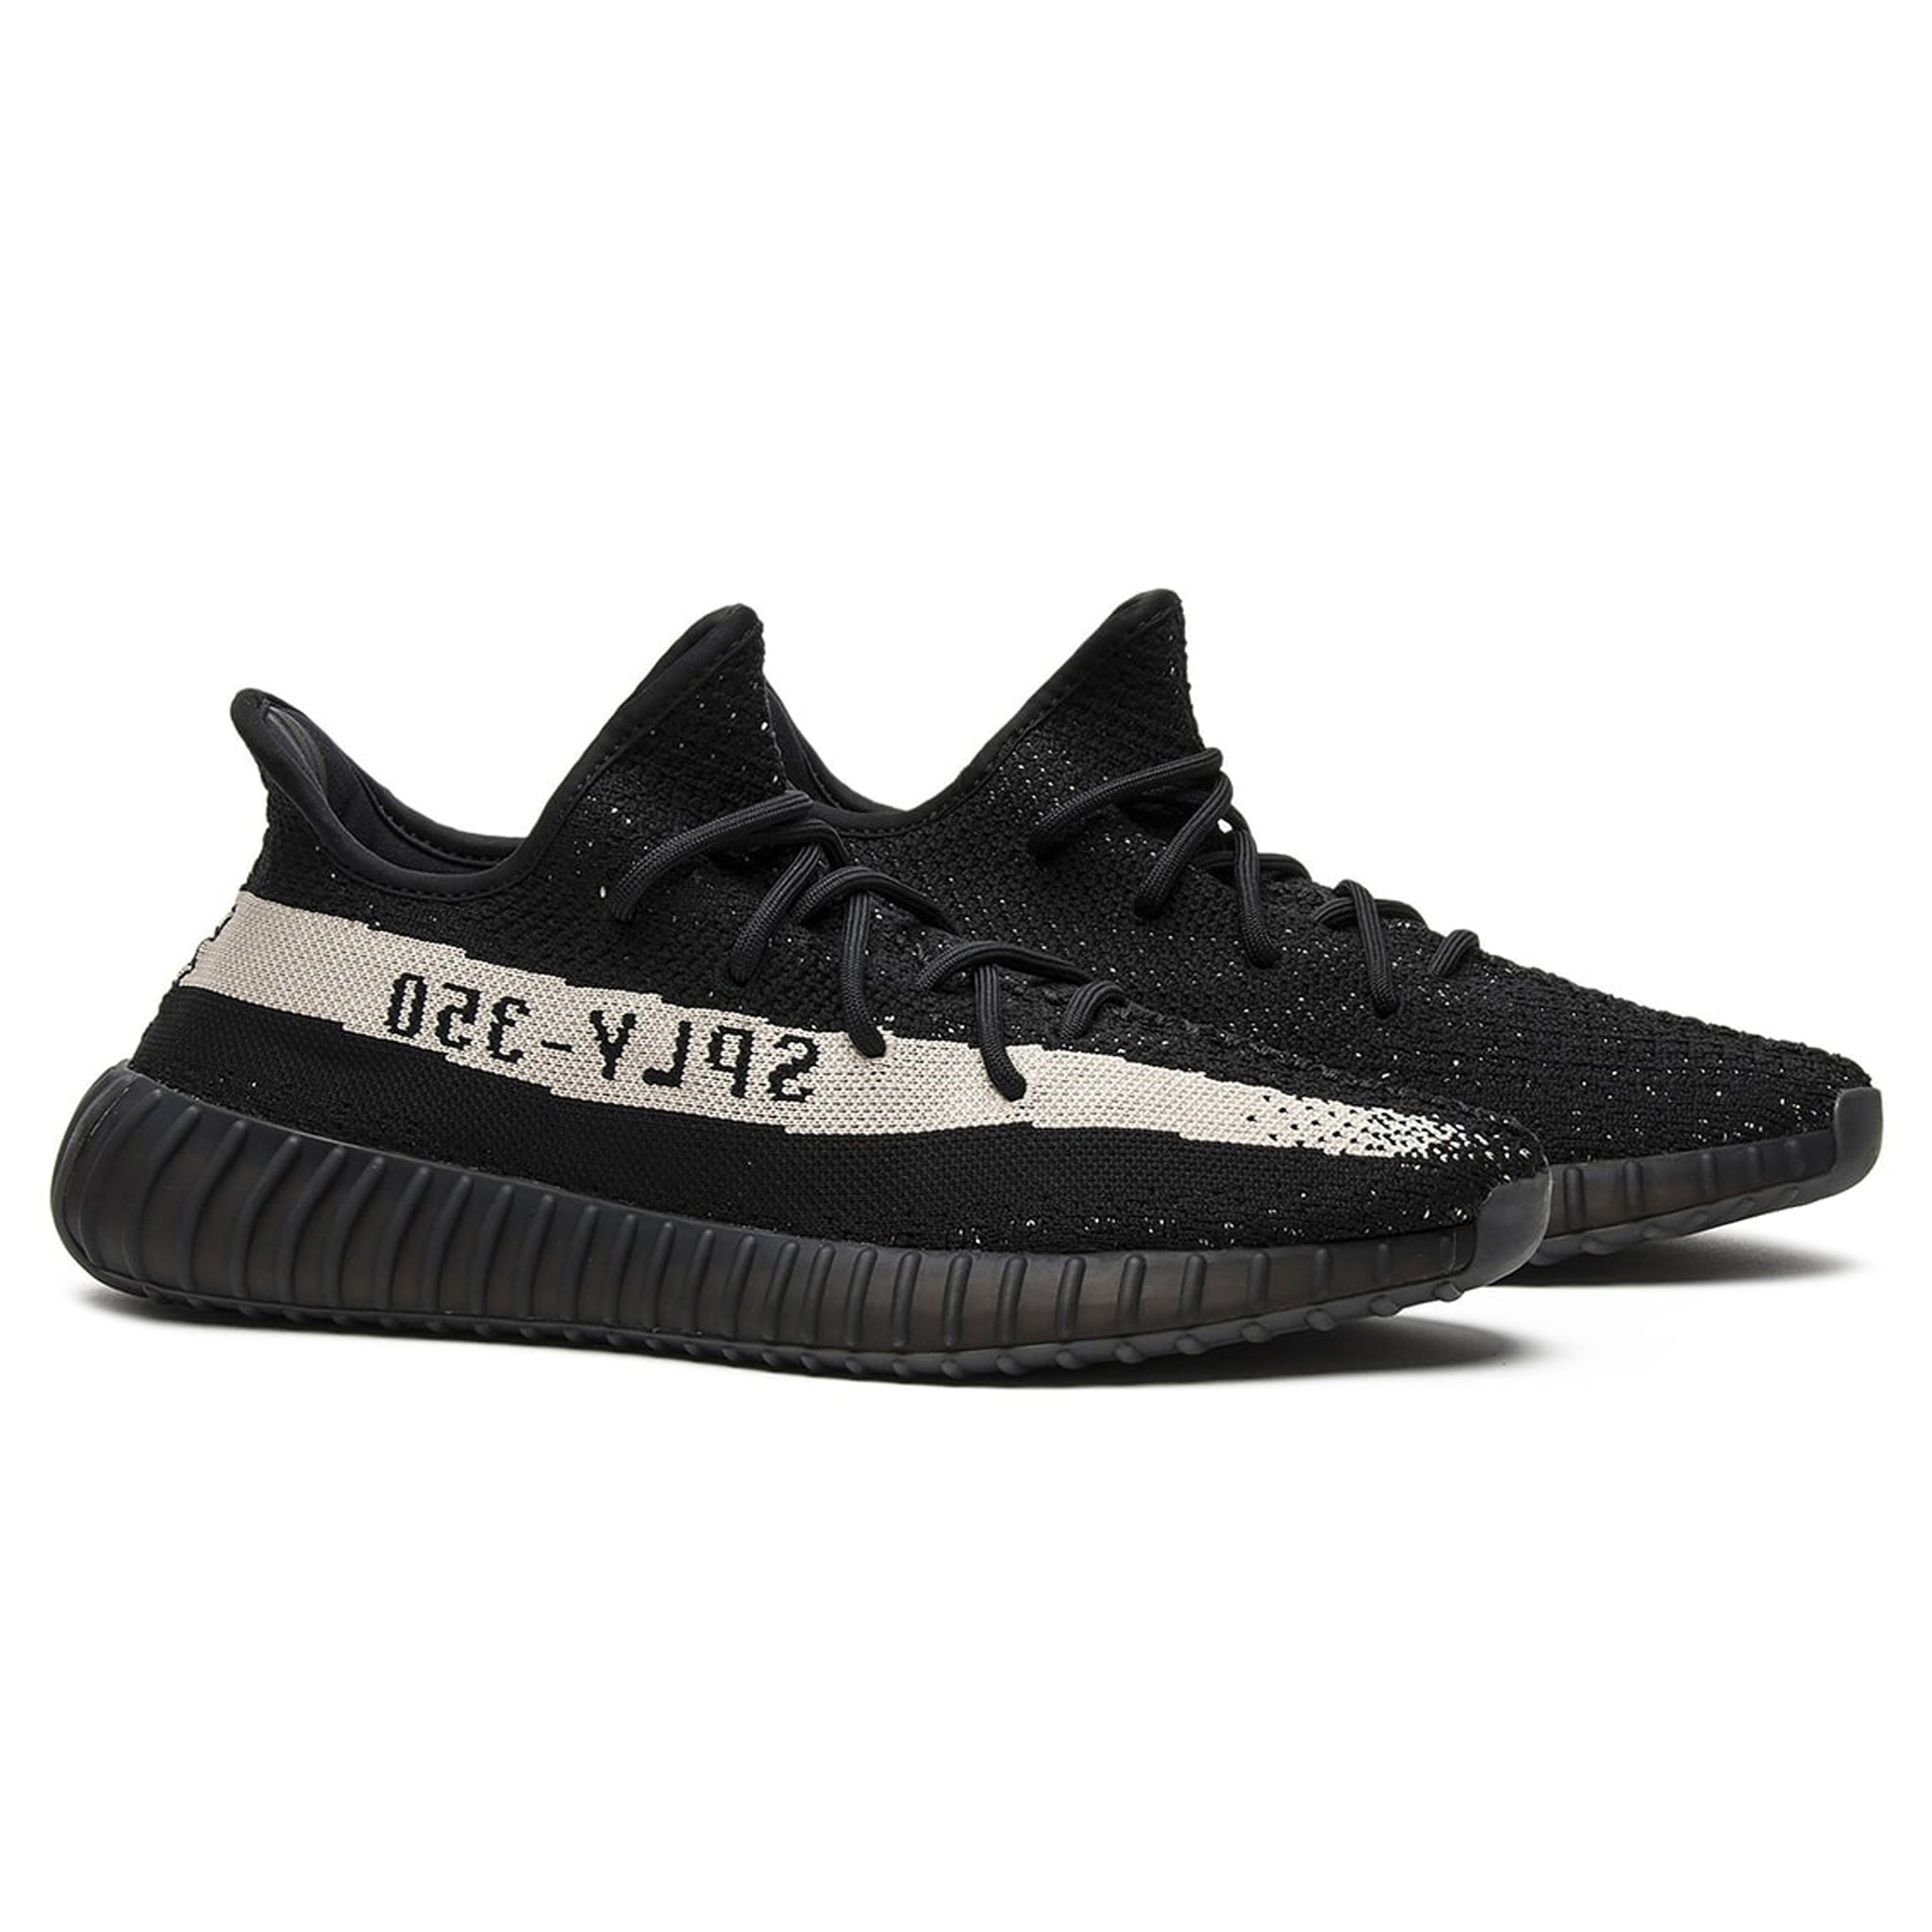 Front side view of Adidas Yeezy Boost 350 V2 Core Black White (Oreo) BY1604